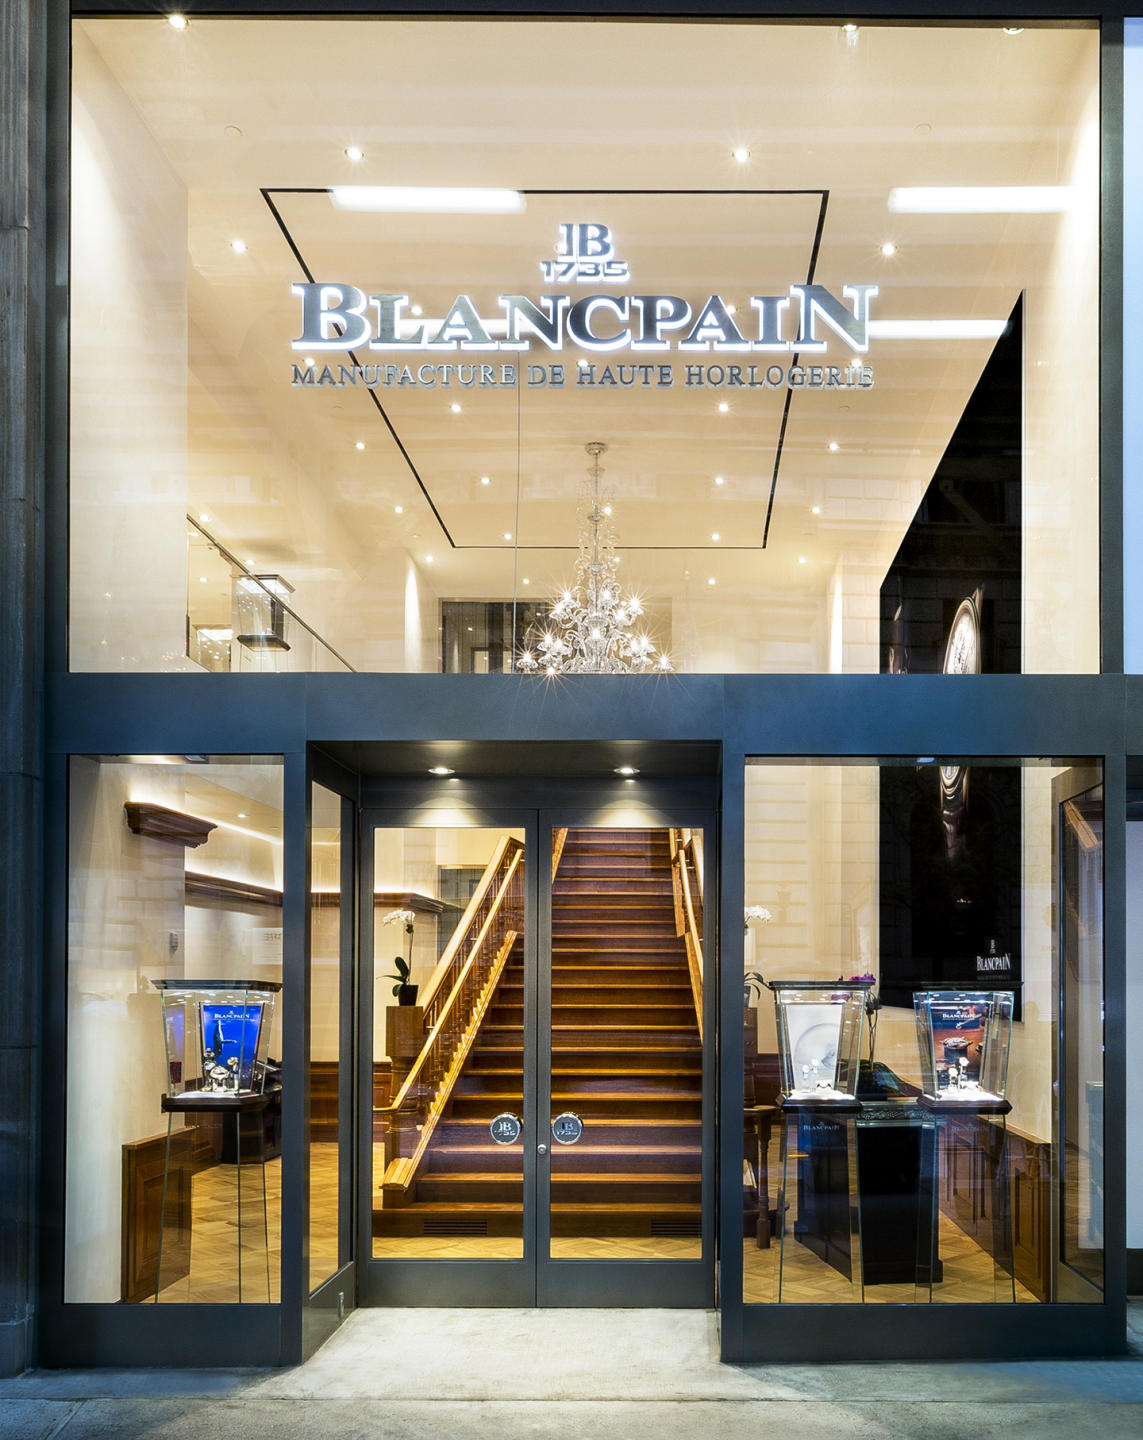 Blancpain Watches interior and exterior architectural photographs of the retail store on Fifth Avenue New York City : IMAGES-Keywording : New York NY Architectural Photographer | Interior and Exterior